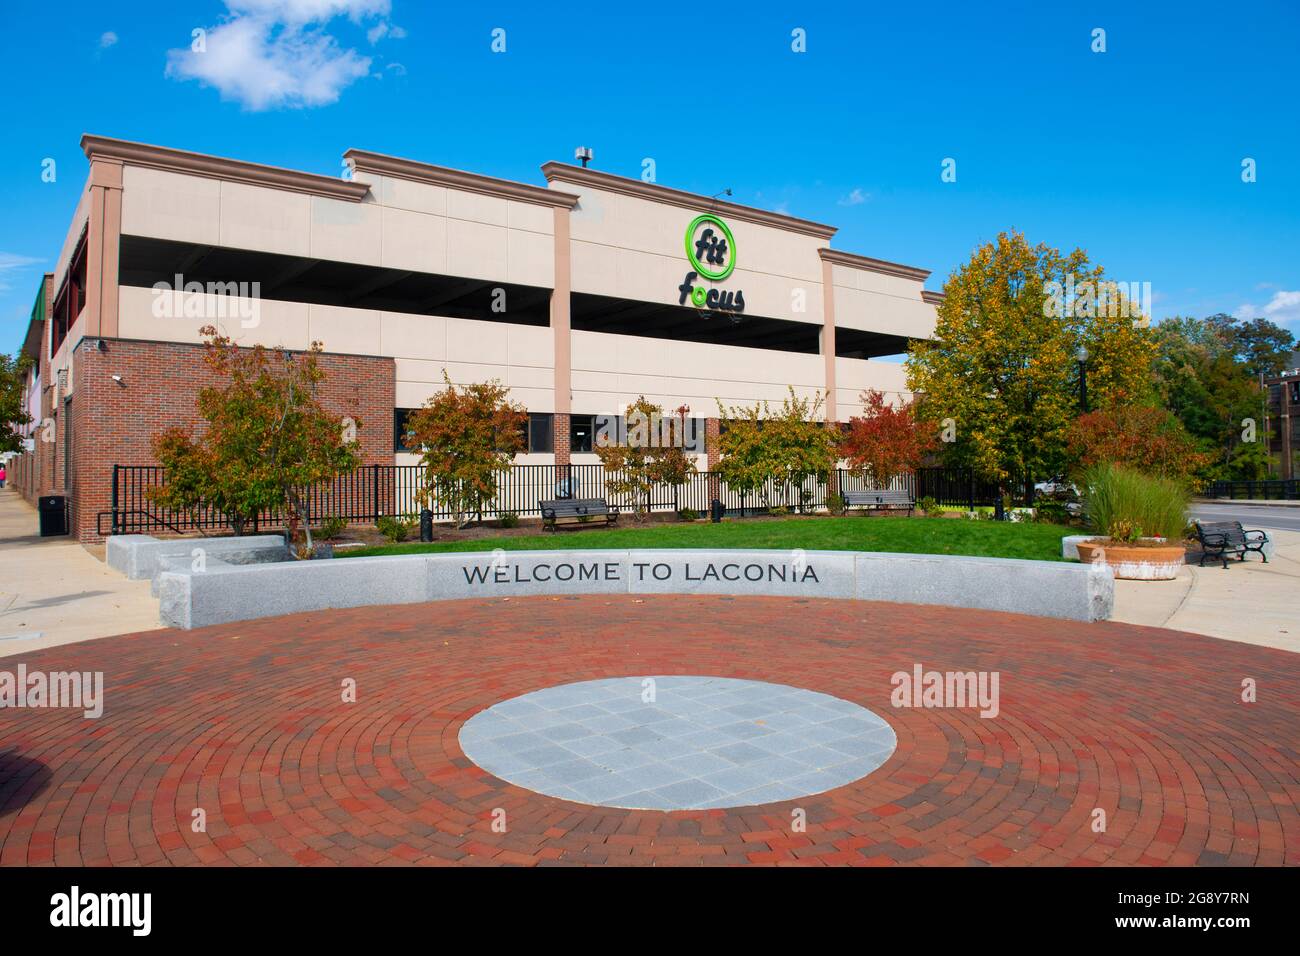 Welcome to Laconia sign at Mill Plaza in city of Laconia, New Hampshire NH, USA. Stock Photo